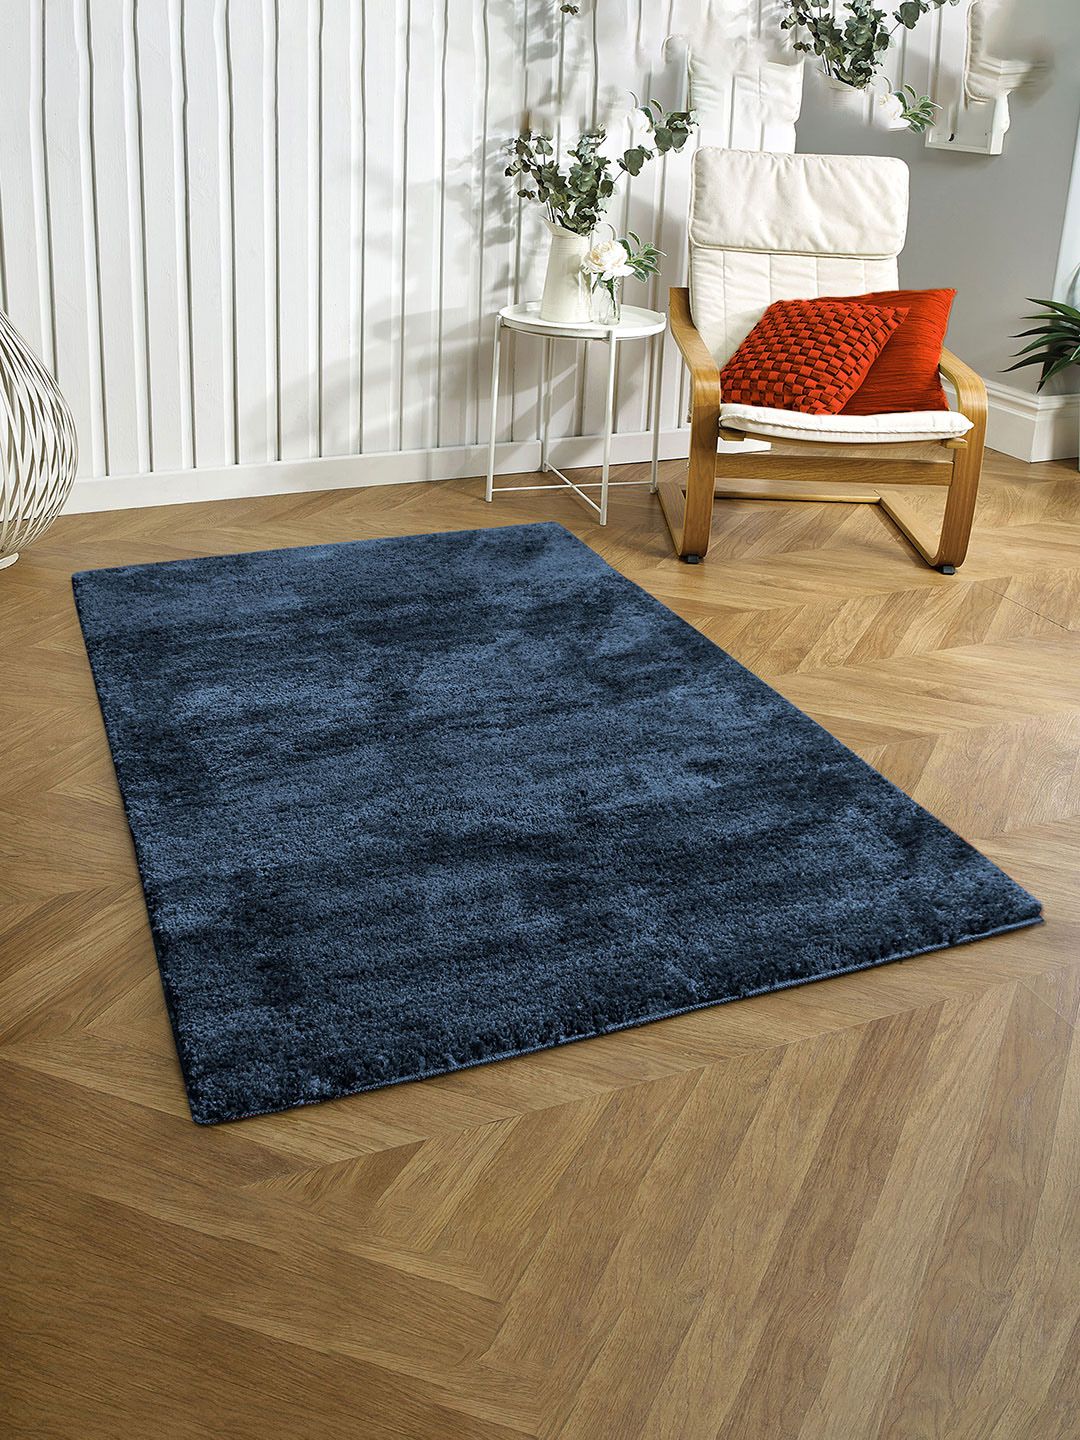 LUXEHOME INTERNATIONAL Navy Blue Solid Anti-Skid Carpet Price in India